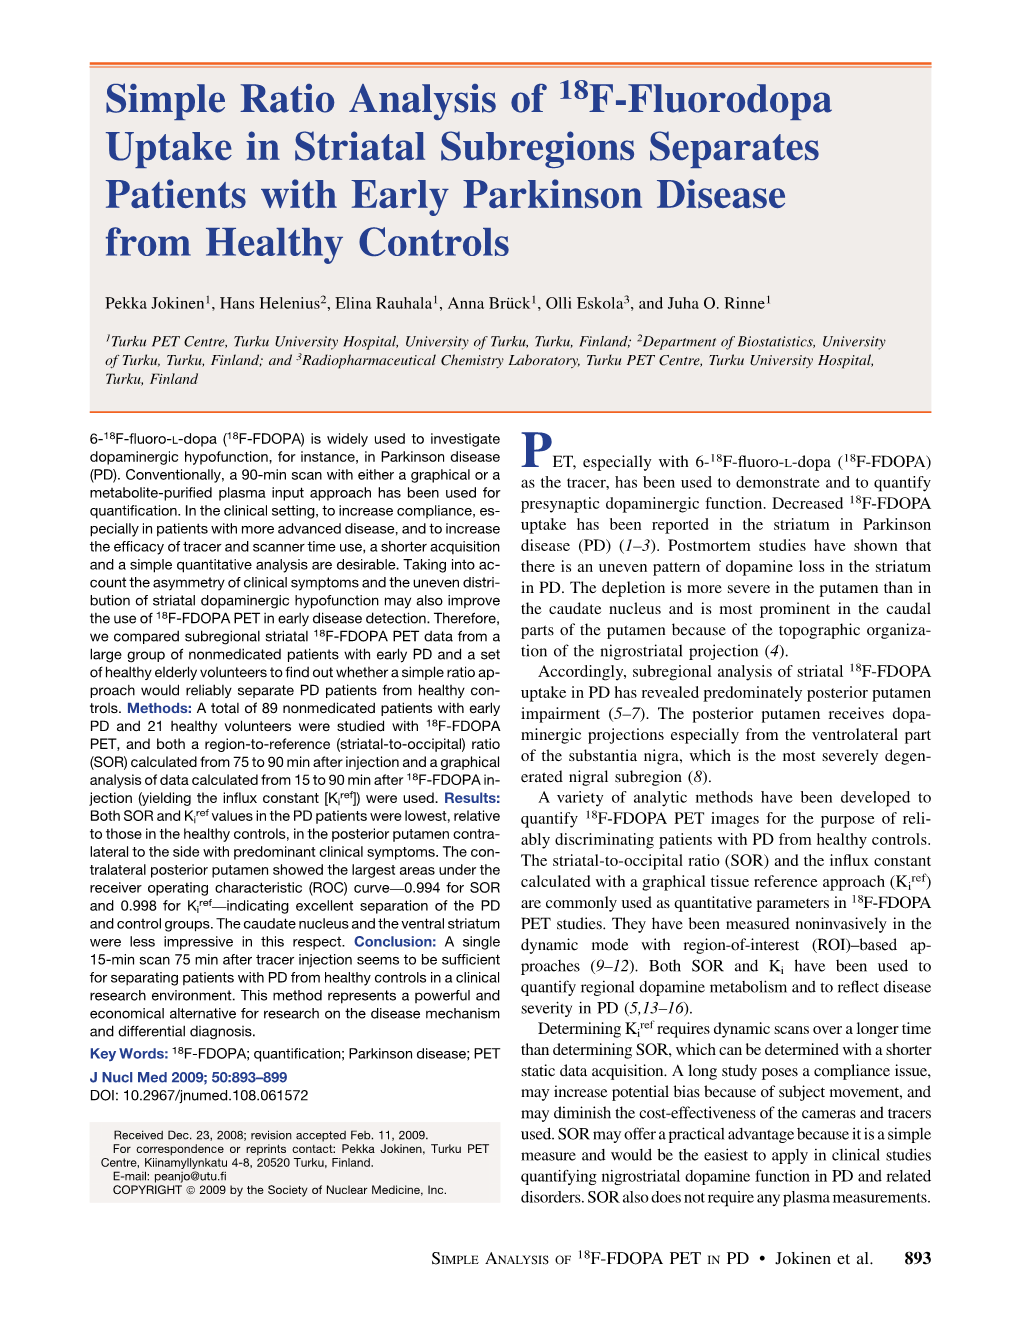 Simple Ratio Analysis of 18F-Fluorodopa Uptake in Striatal Subregions Separates Patients with Early Parkinson Disease from Healthy Controls